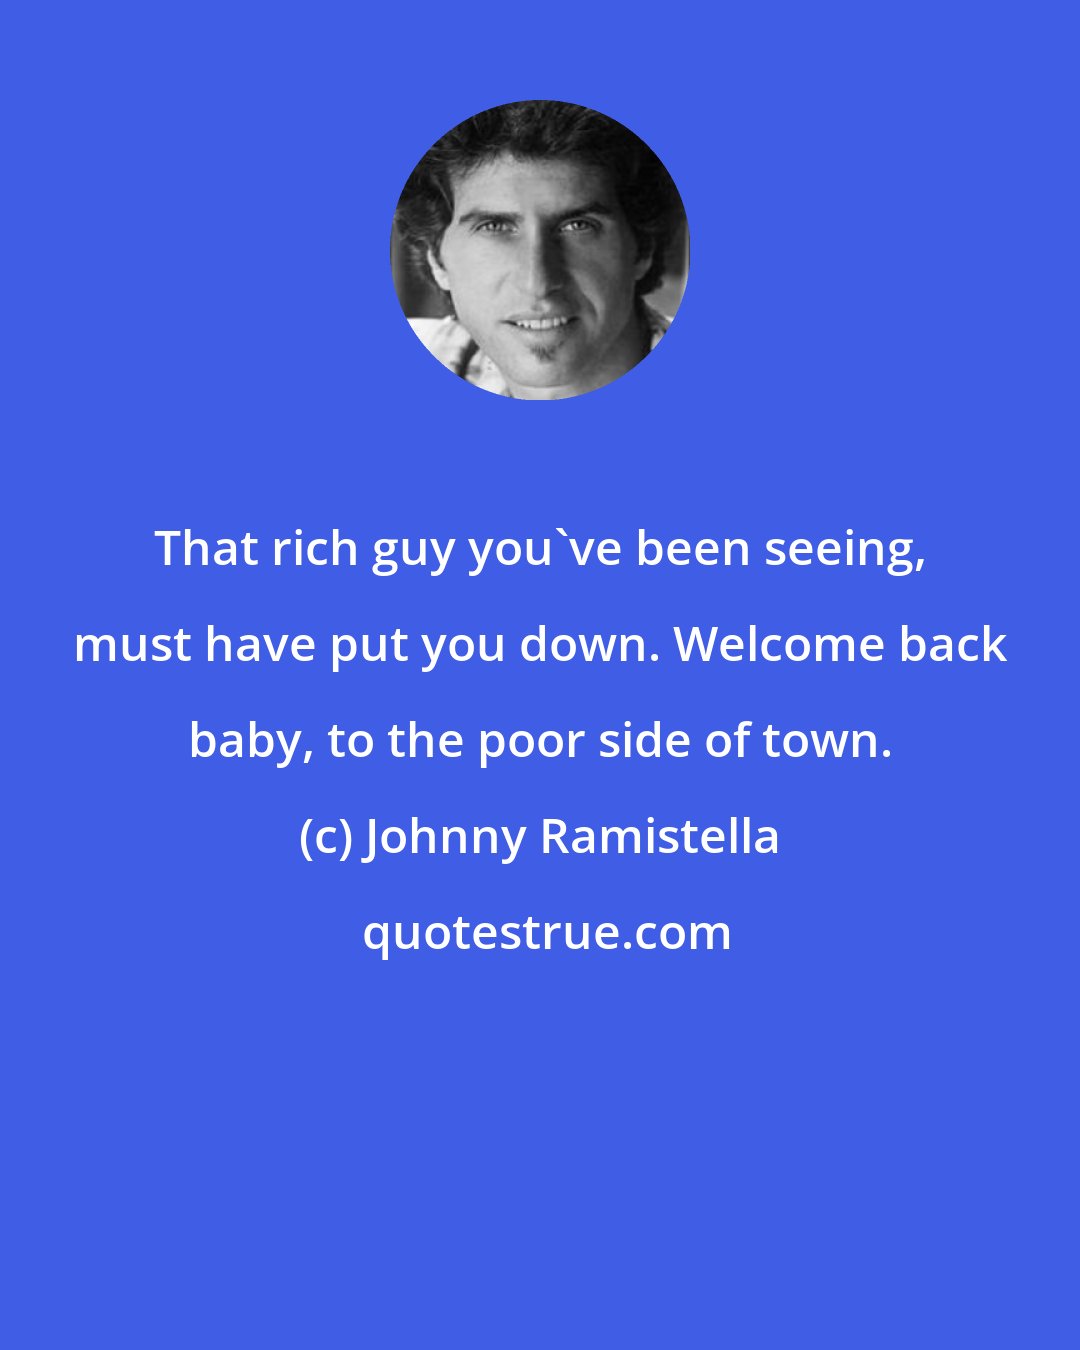 Johnny Ramistella: That rich guy you've been seeing, must have put you down. Welcome back baby, to the poor side of town.